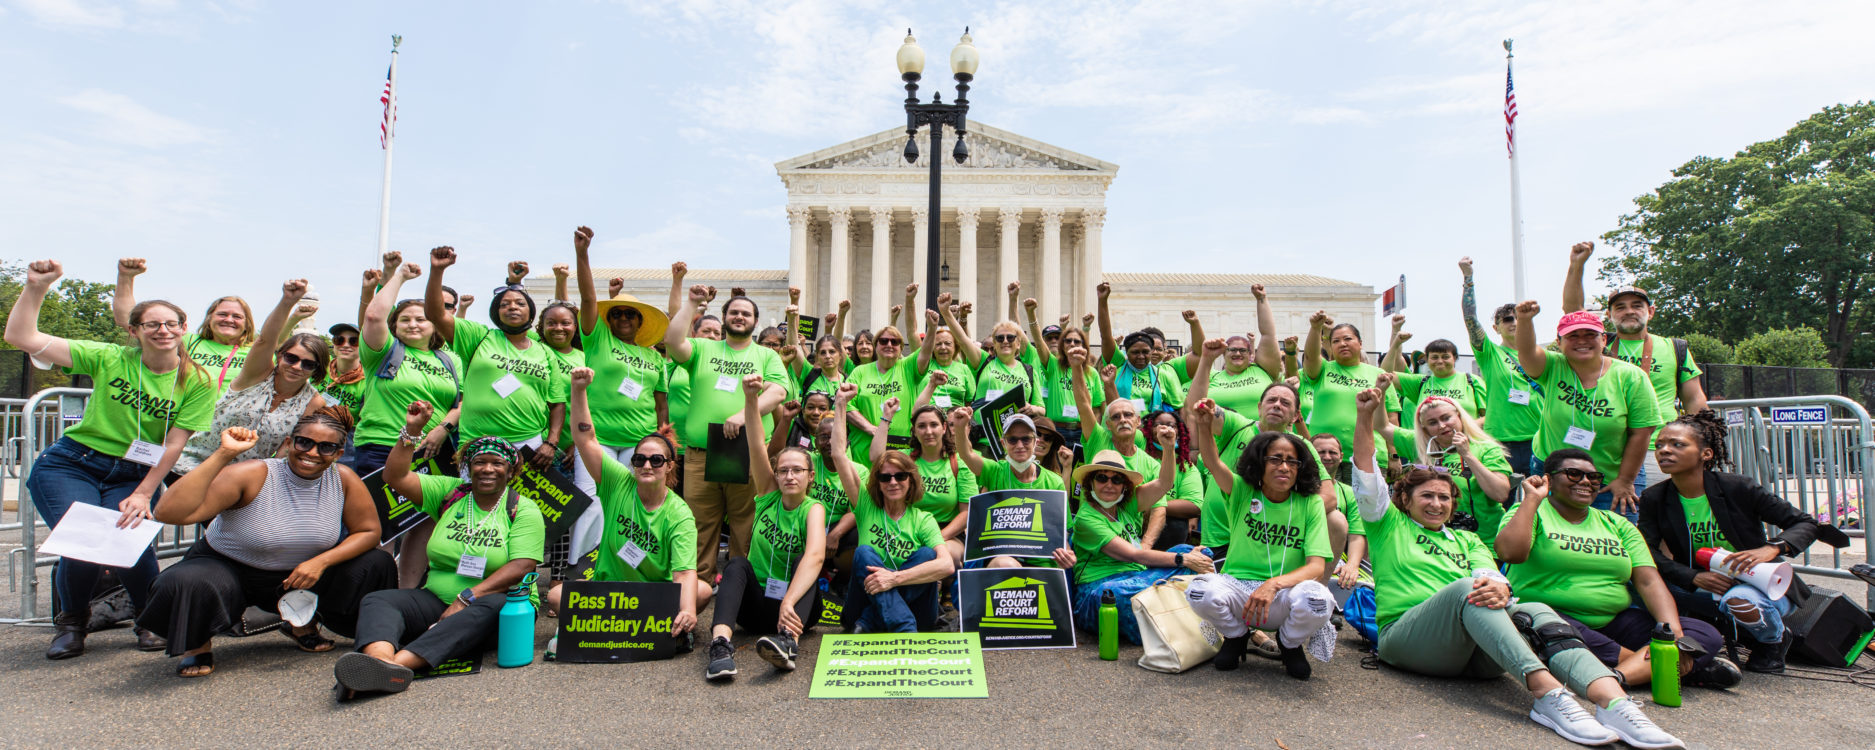 A group pf people wearing green shirts that read "Demand Justice" sitting with fists raised in front of the Supreme Court in DC.